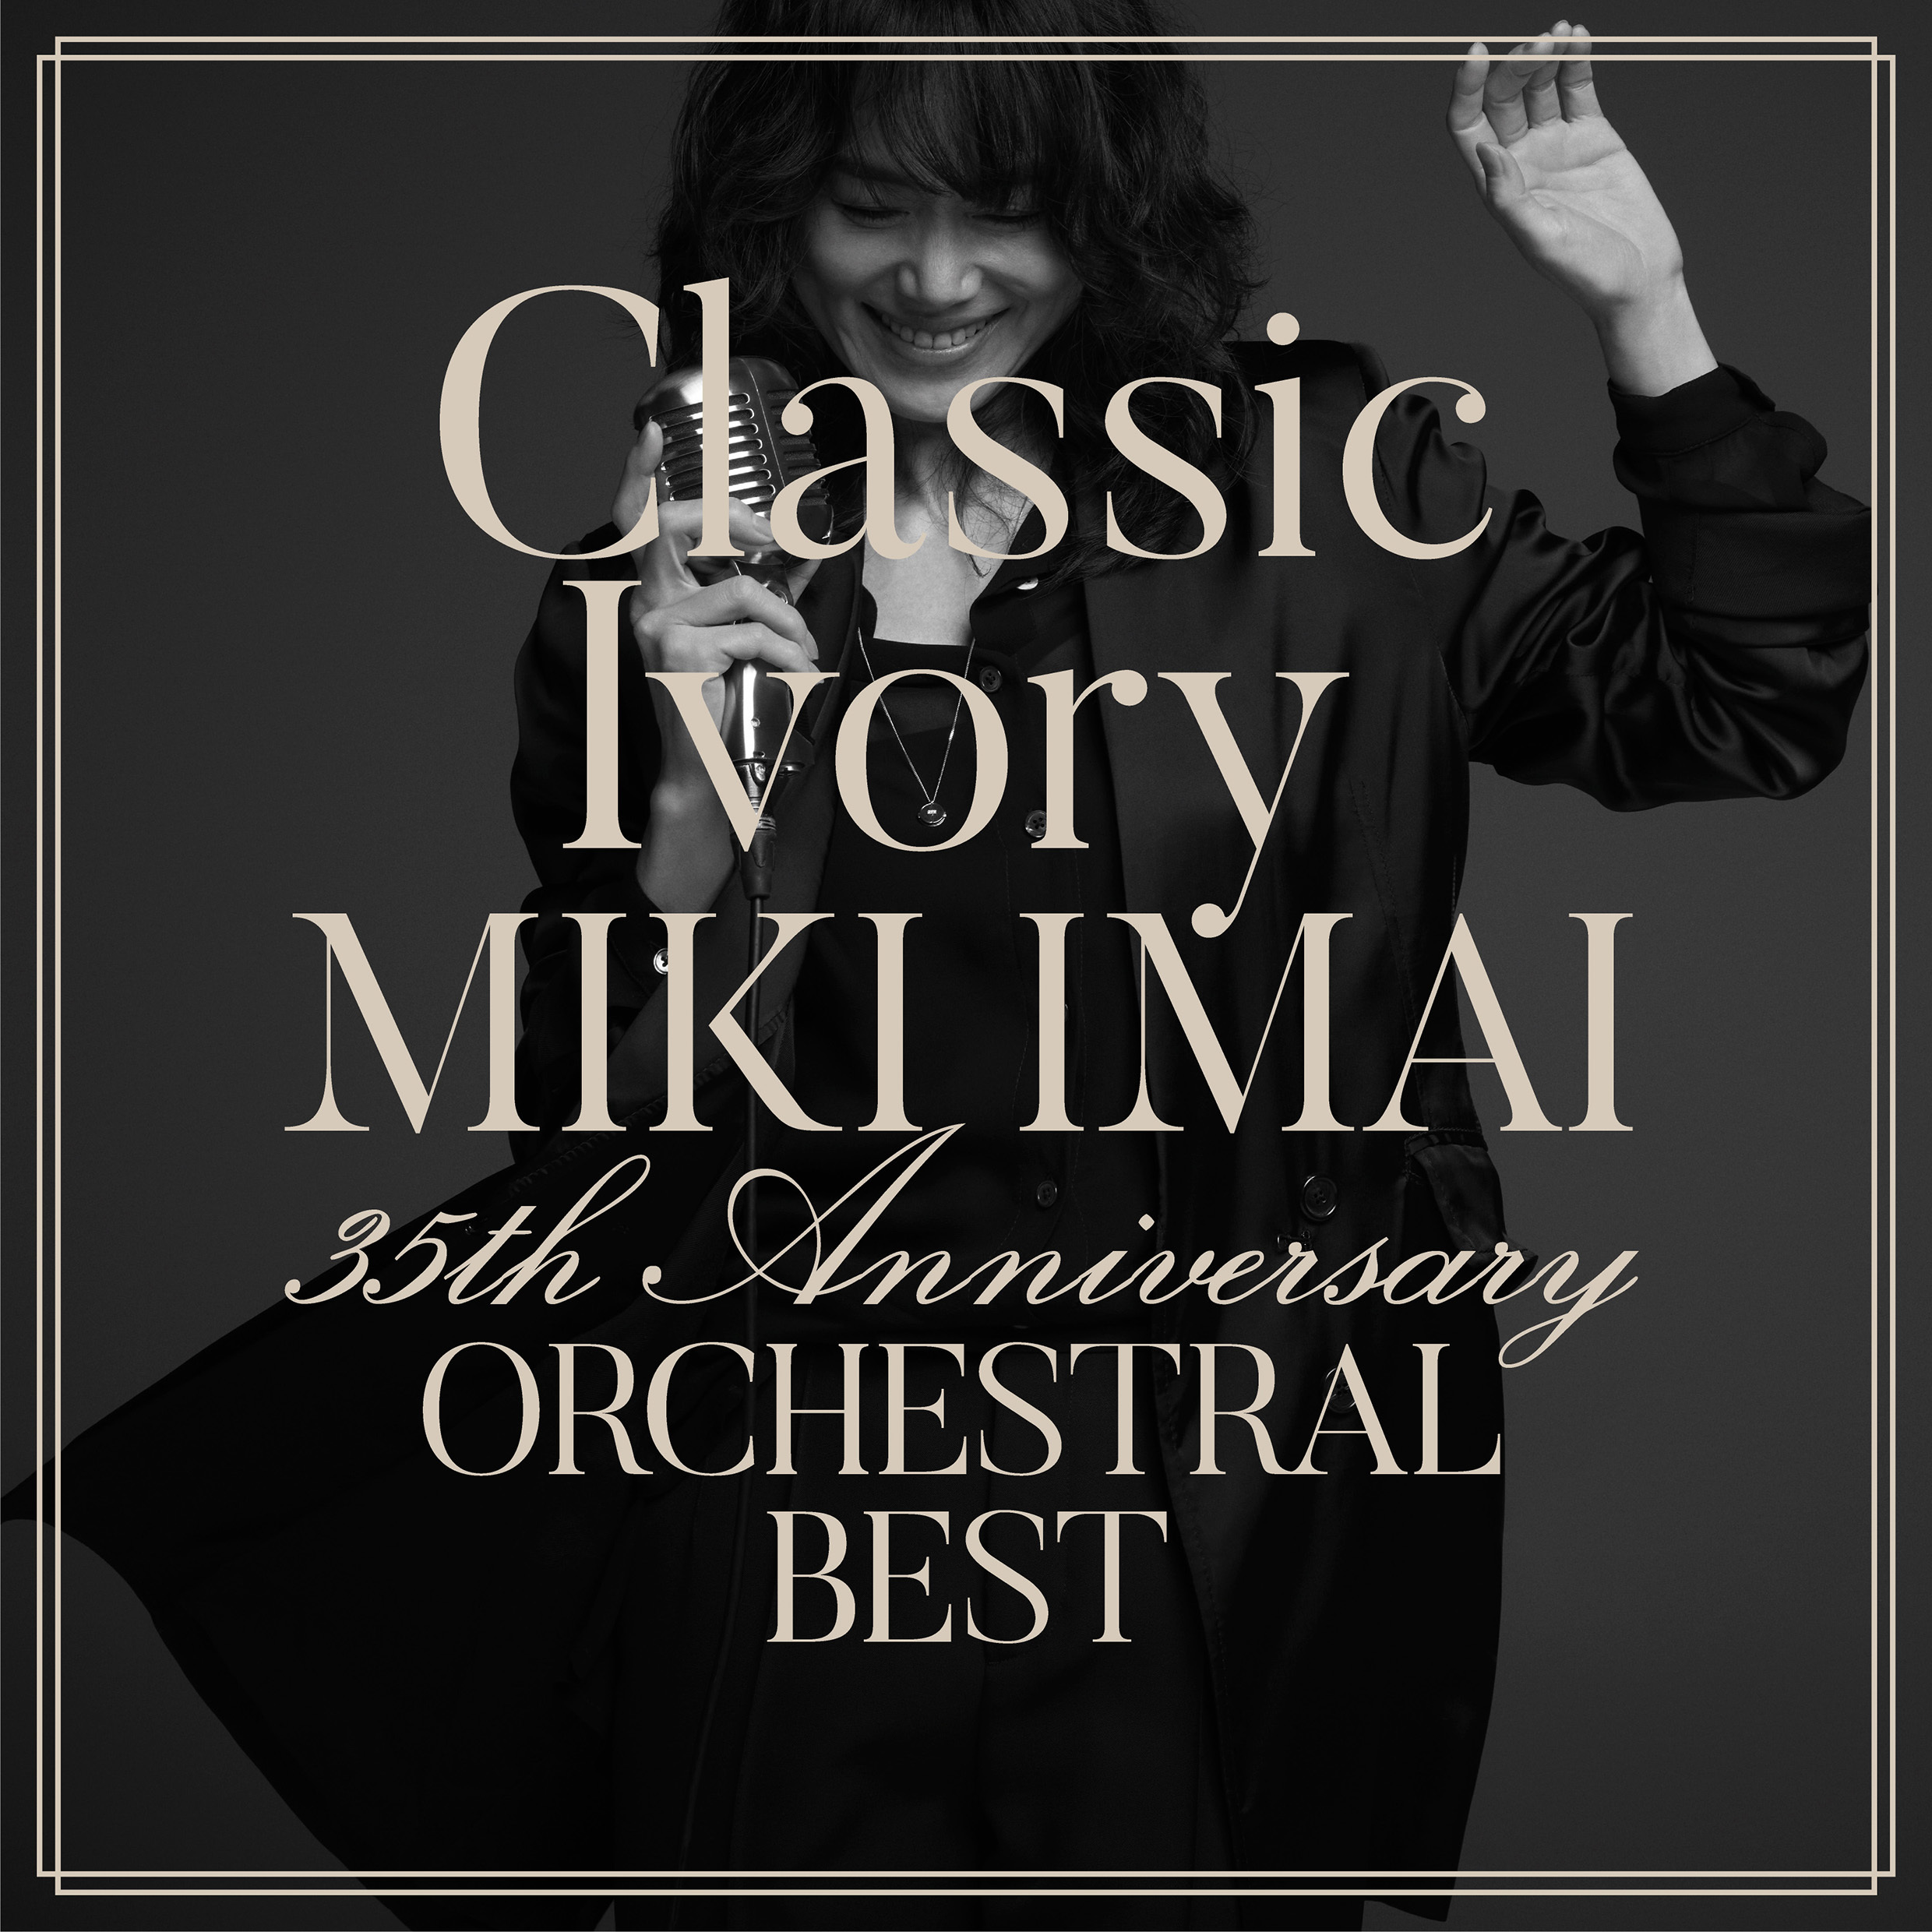 『Classic Ivory 35th Anniversary ORCHESTRAL BEST』ジャケット